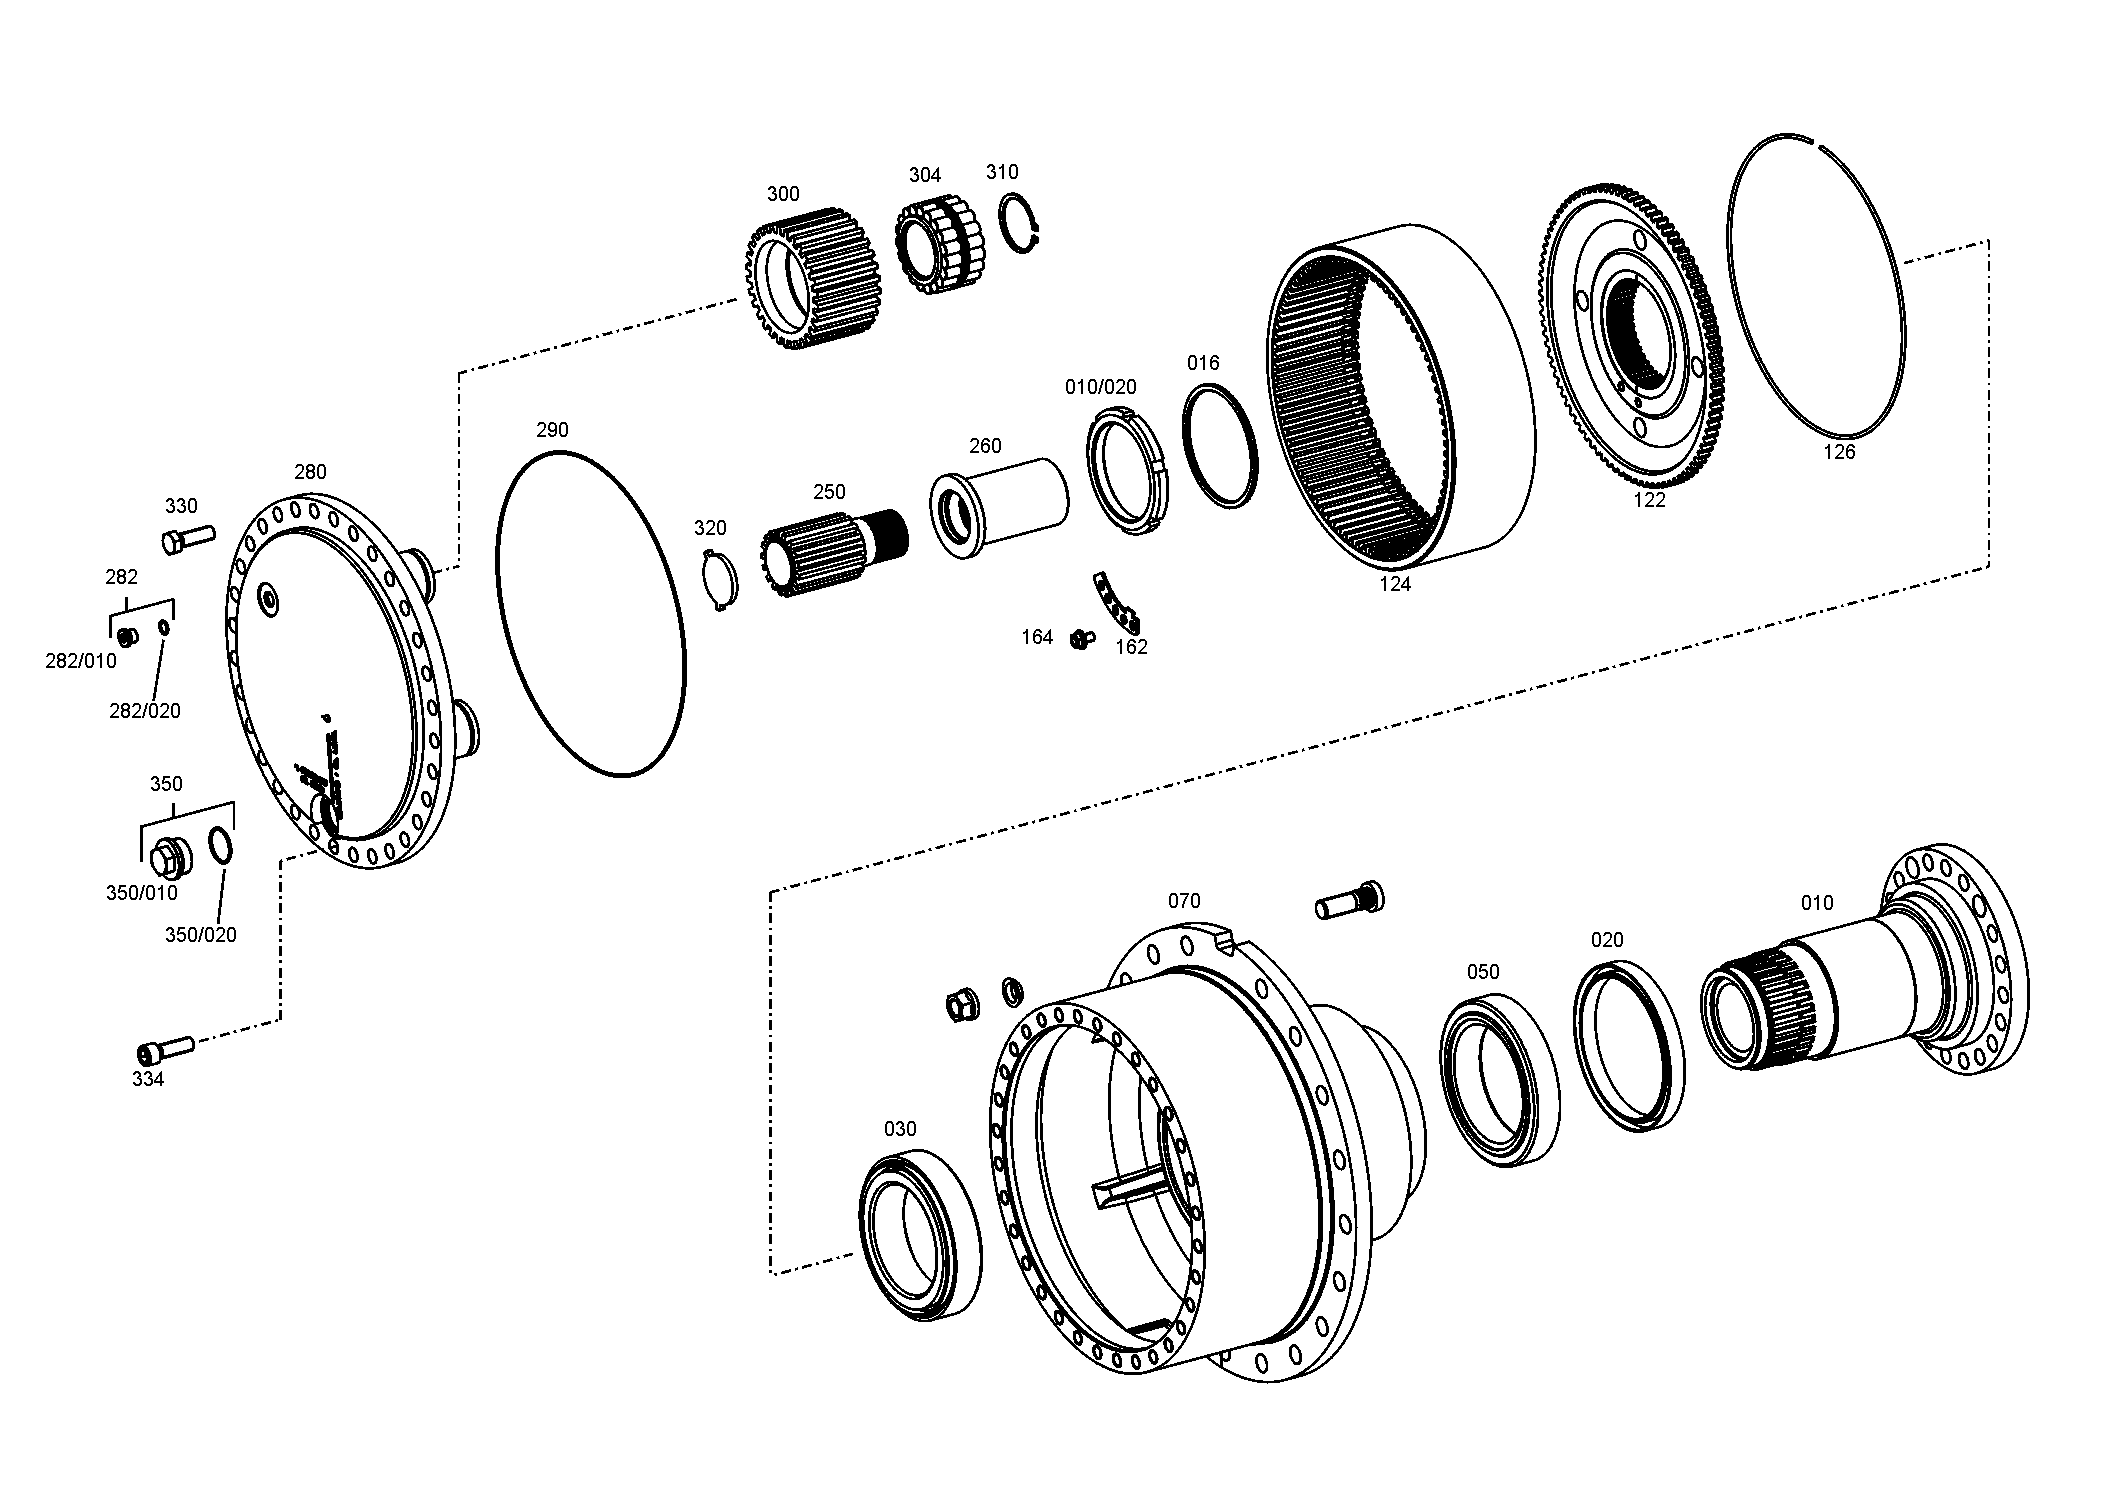 drawing for Astra Veicoli Industriali 0000000134642 - SHAFT SEAL